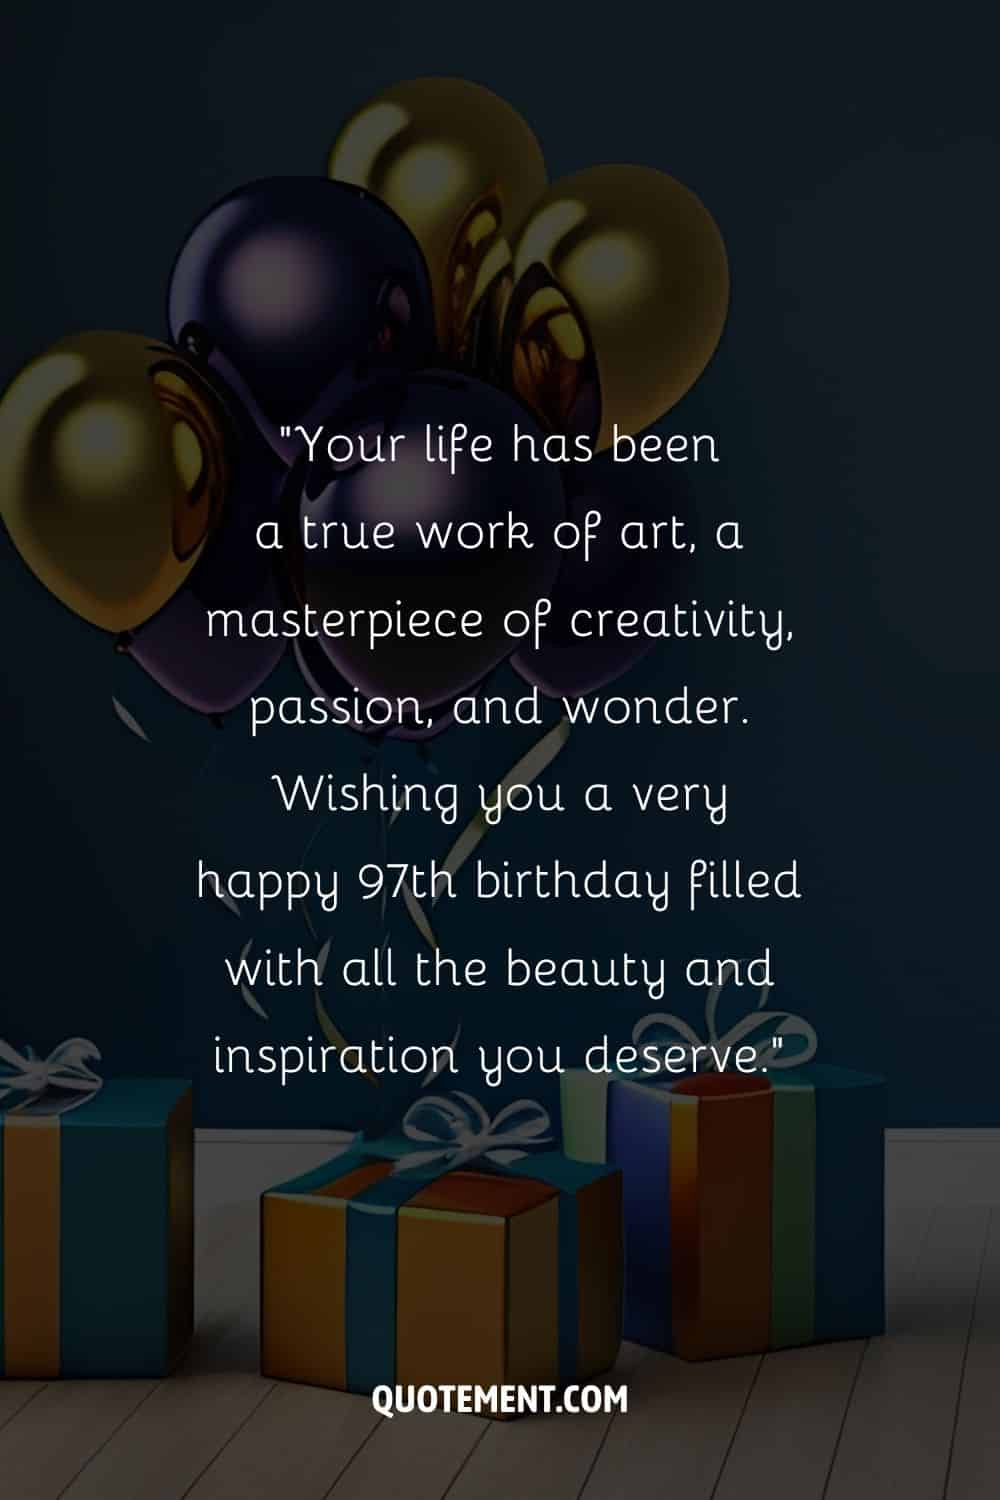 Lovely message for their 97th birthday and presents and balloons in the background, too
